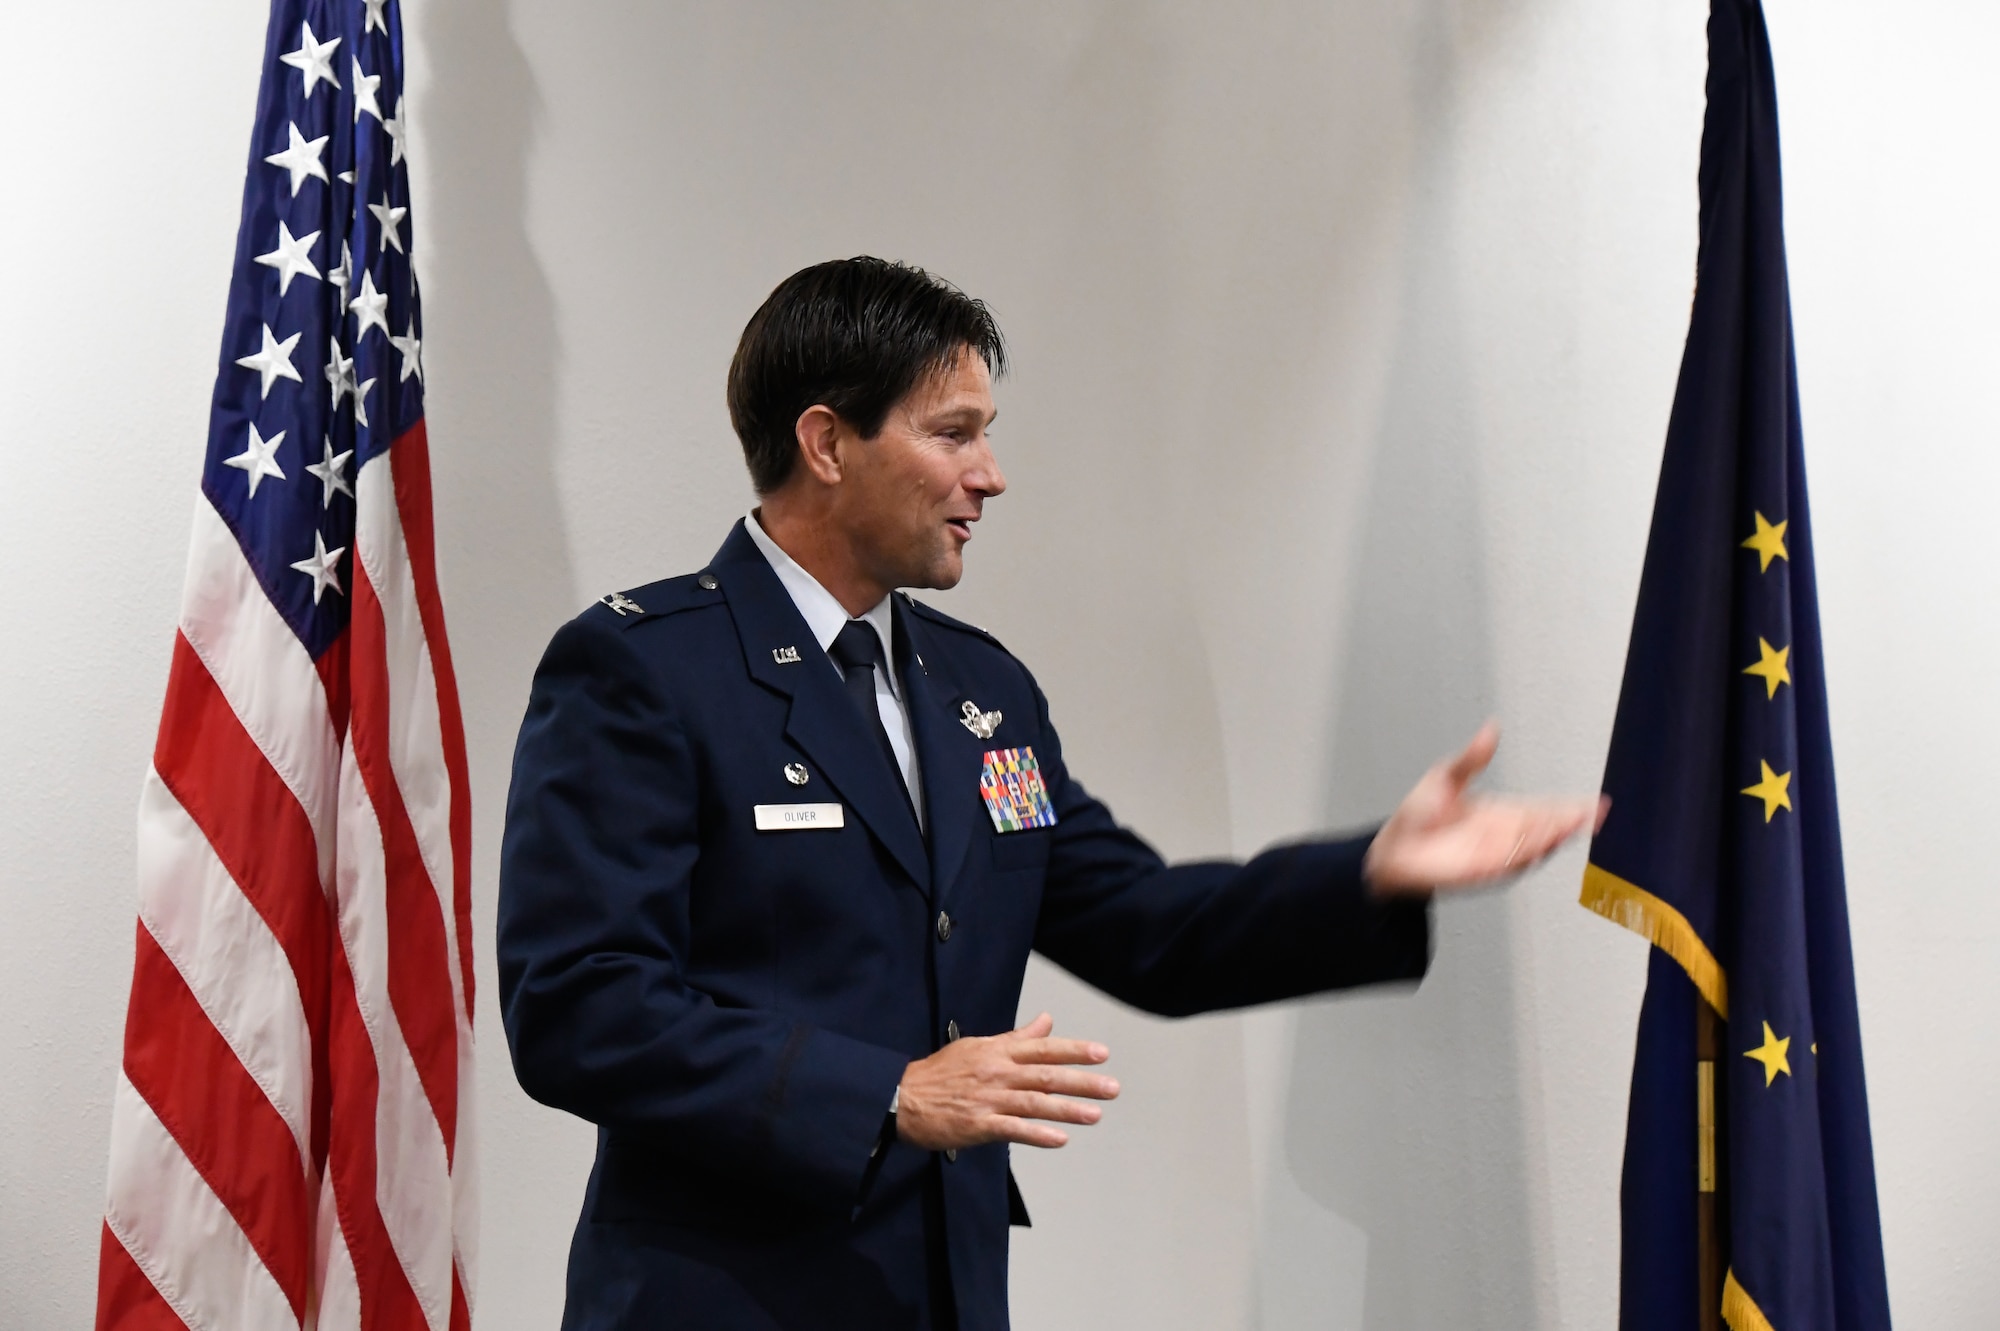 U.S. Air Force Col. Ronald Oliver, 168th Wing Deputy Commander, addresses the audience during a change of command ceremony August 5, 2023, at Eielson Air Force Base, Alaska. A change of command ceremony is a military tradition representing the formal transfer of responsibility of a unit from one commanding officer to another. (U.S. Air National Guard photo by Senior Master Sgt. Julie Avey)